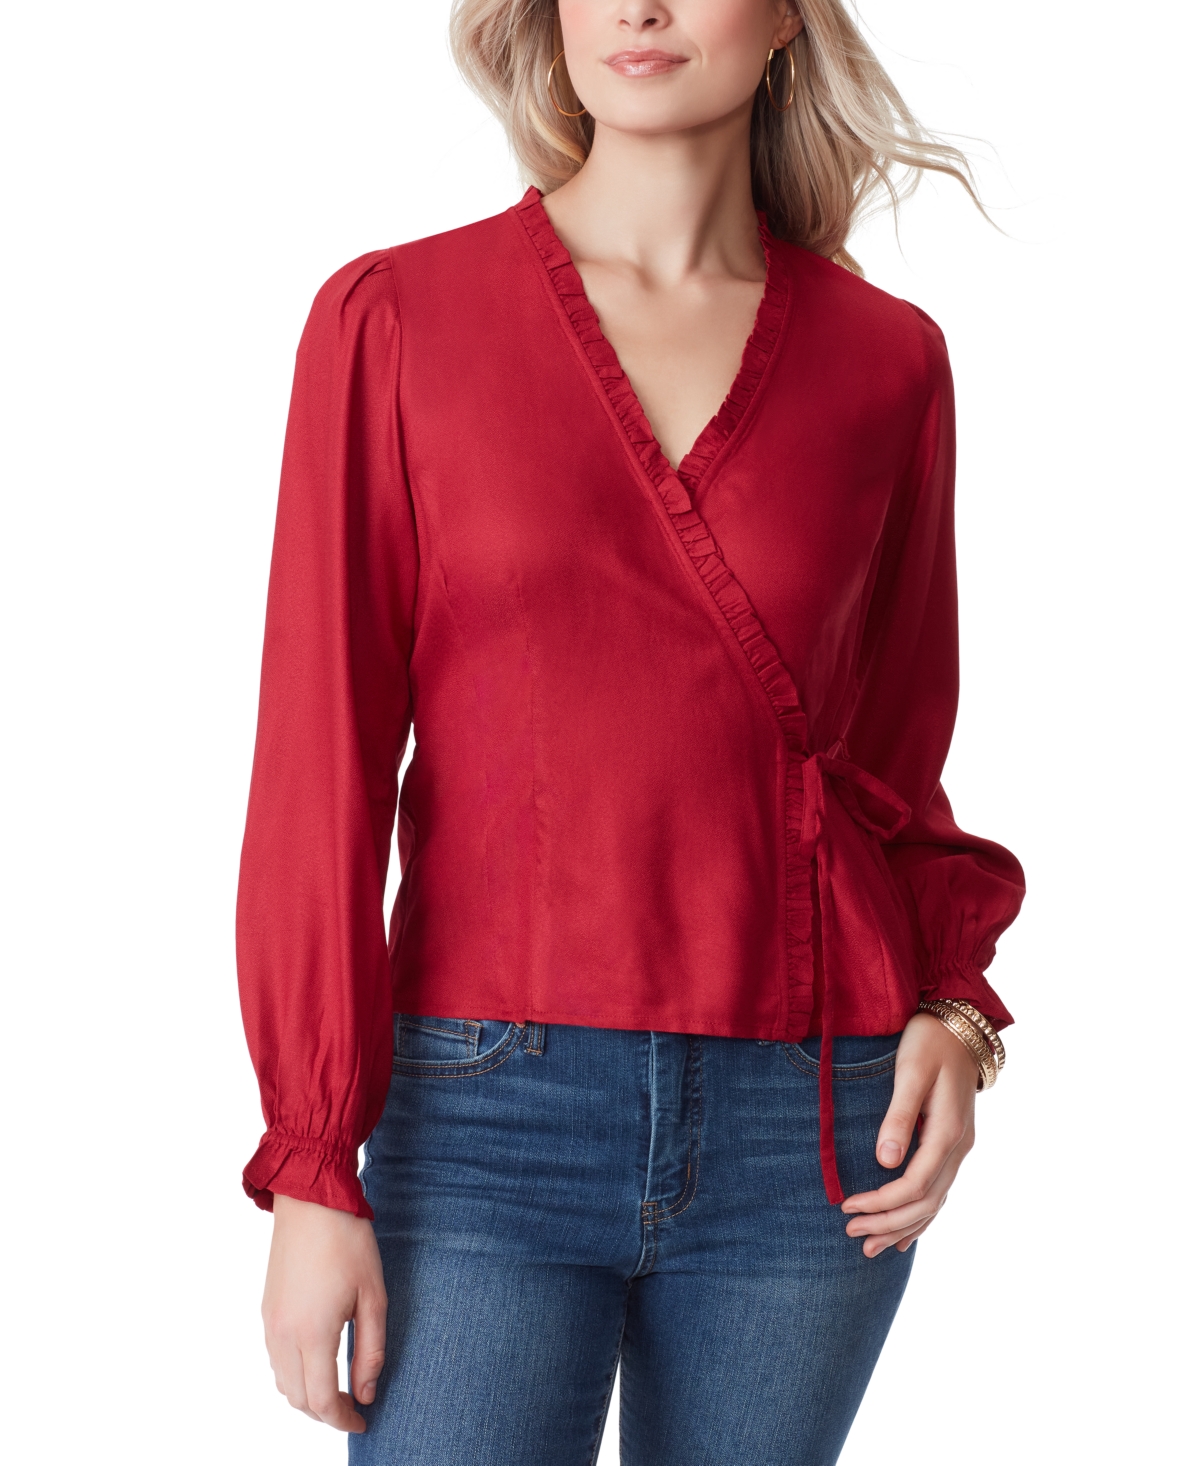 Women's Solid Tanya Ruffled Wrap Top - Rio Red